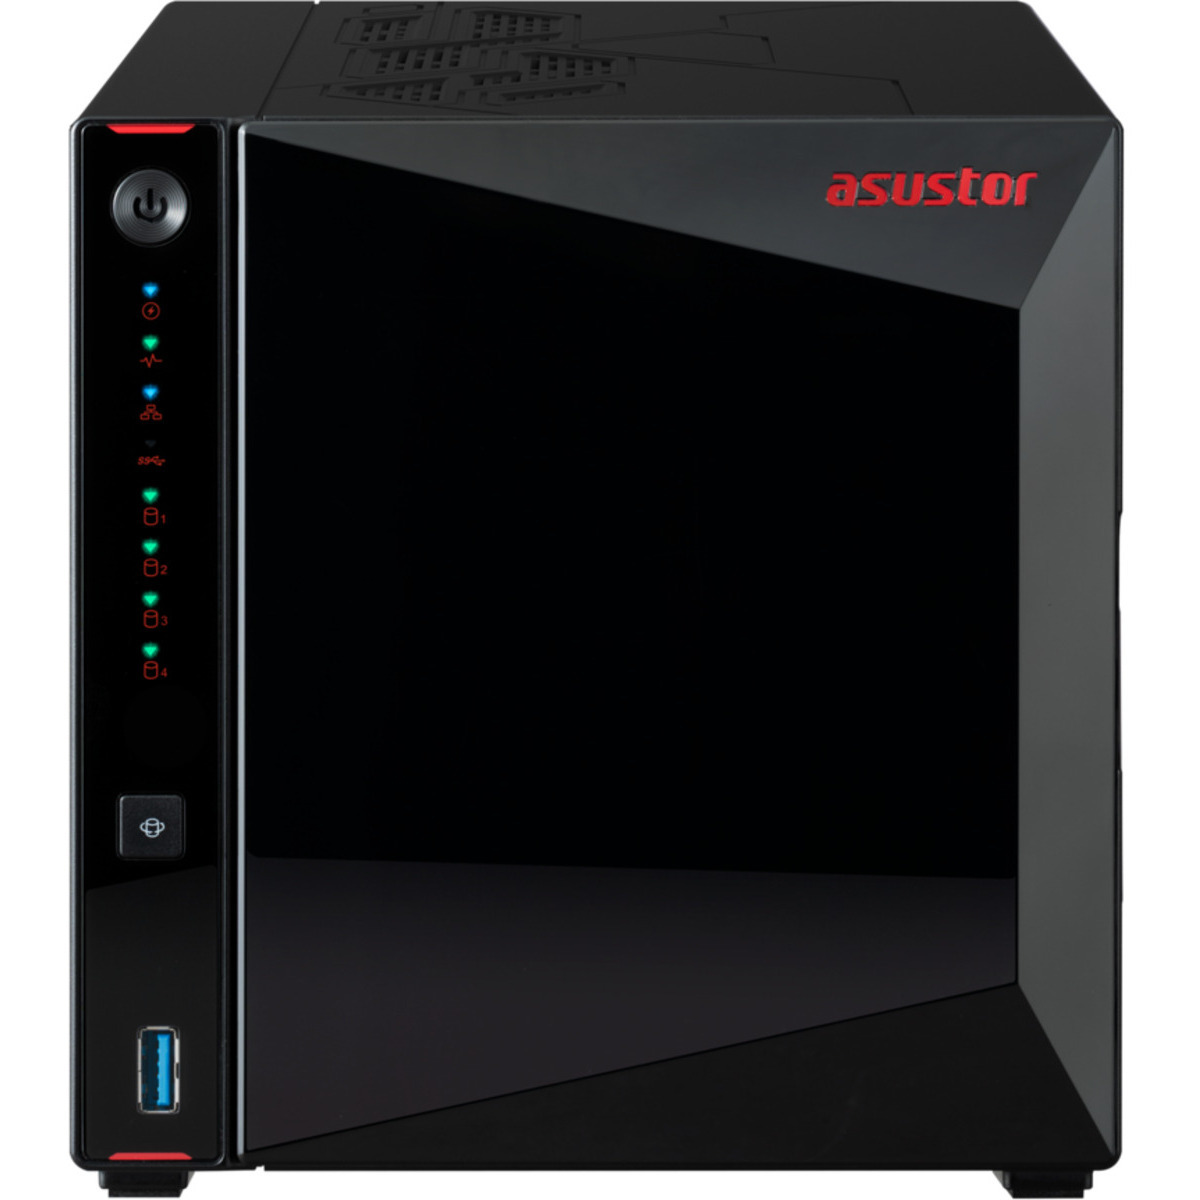 ASUSTOR Nimbustor 4 Gen2 AS5404T 32tb 4-Bay Desktop Multimedia / Power User / Business NAS - Network Attached Storage Device 4x8tb Western Digital Red Plus WD80EFPX 3.5 7200rpm SATA 6Gb/s HDD NAS Class Drives Installed - Burn-In Tested - FREE RAM UPGRADE Nimbustor 4 Gen2 AS5404T